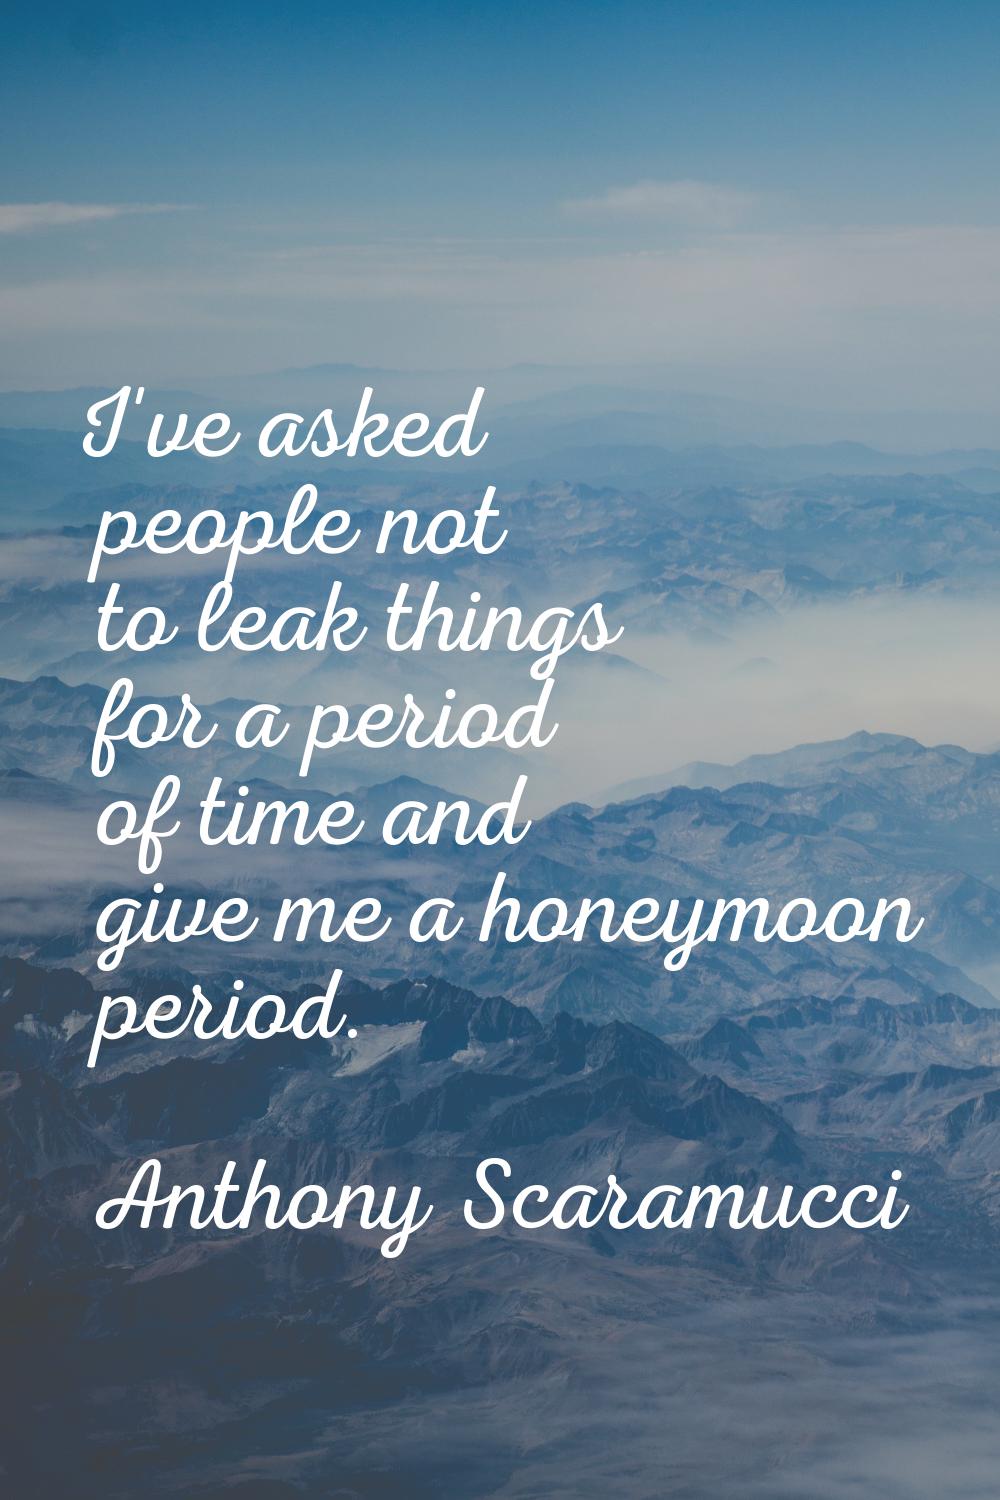 I've asked people not to leak things for a period of time and give me a honeymoon period.